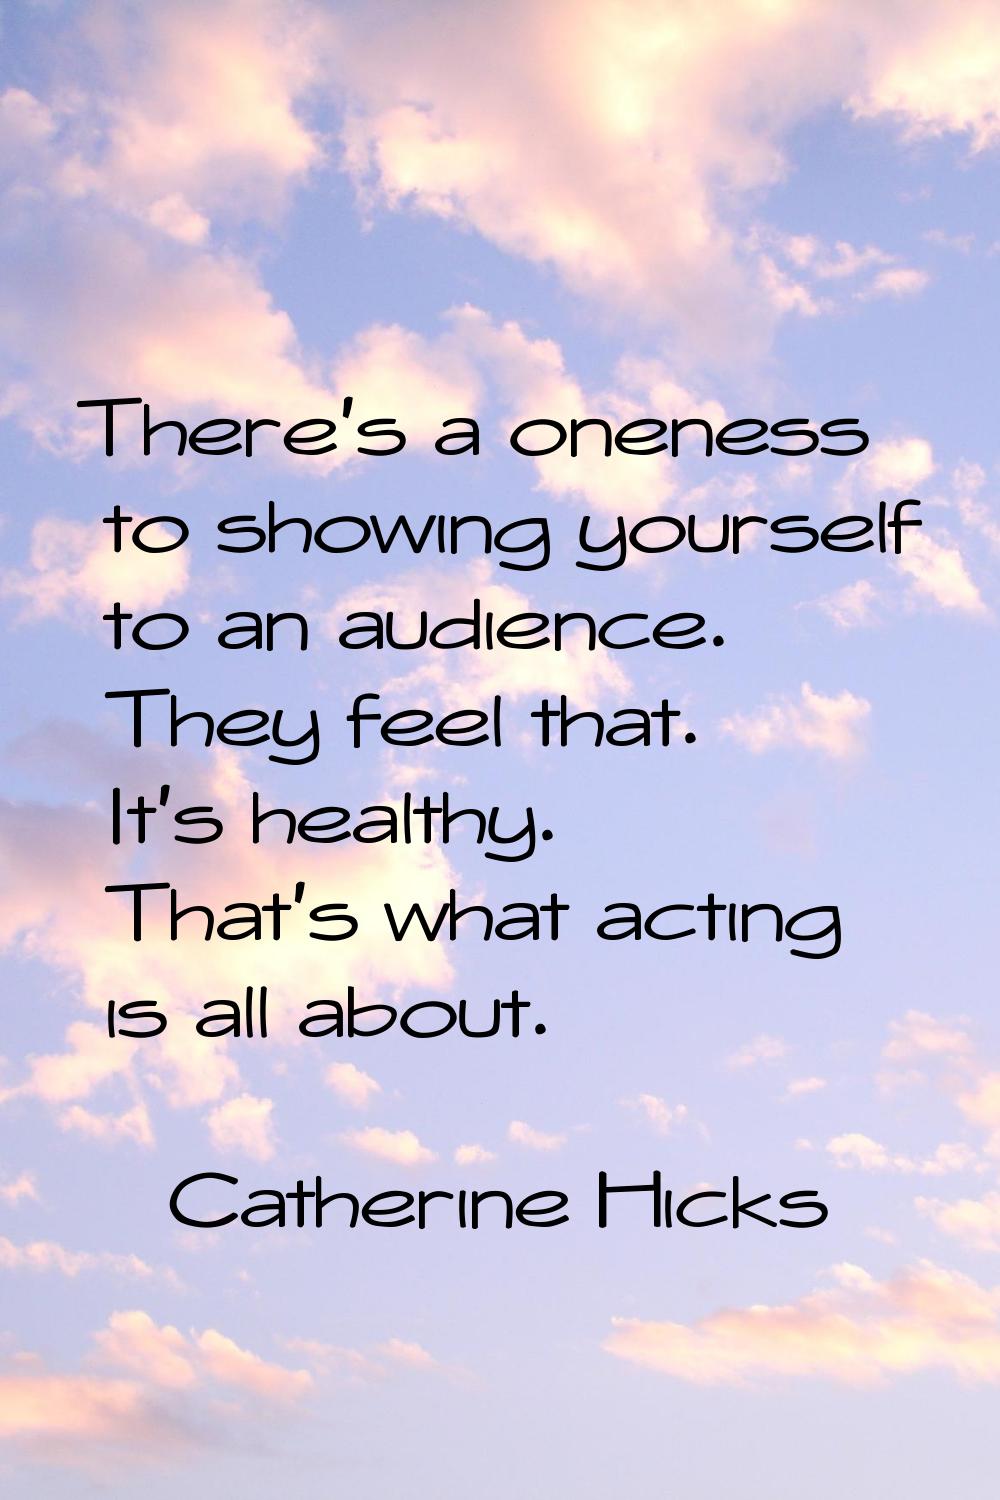 There's a oneness to showing yourself to an audience. They feel that. It's healthy. That's what act